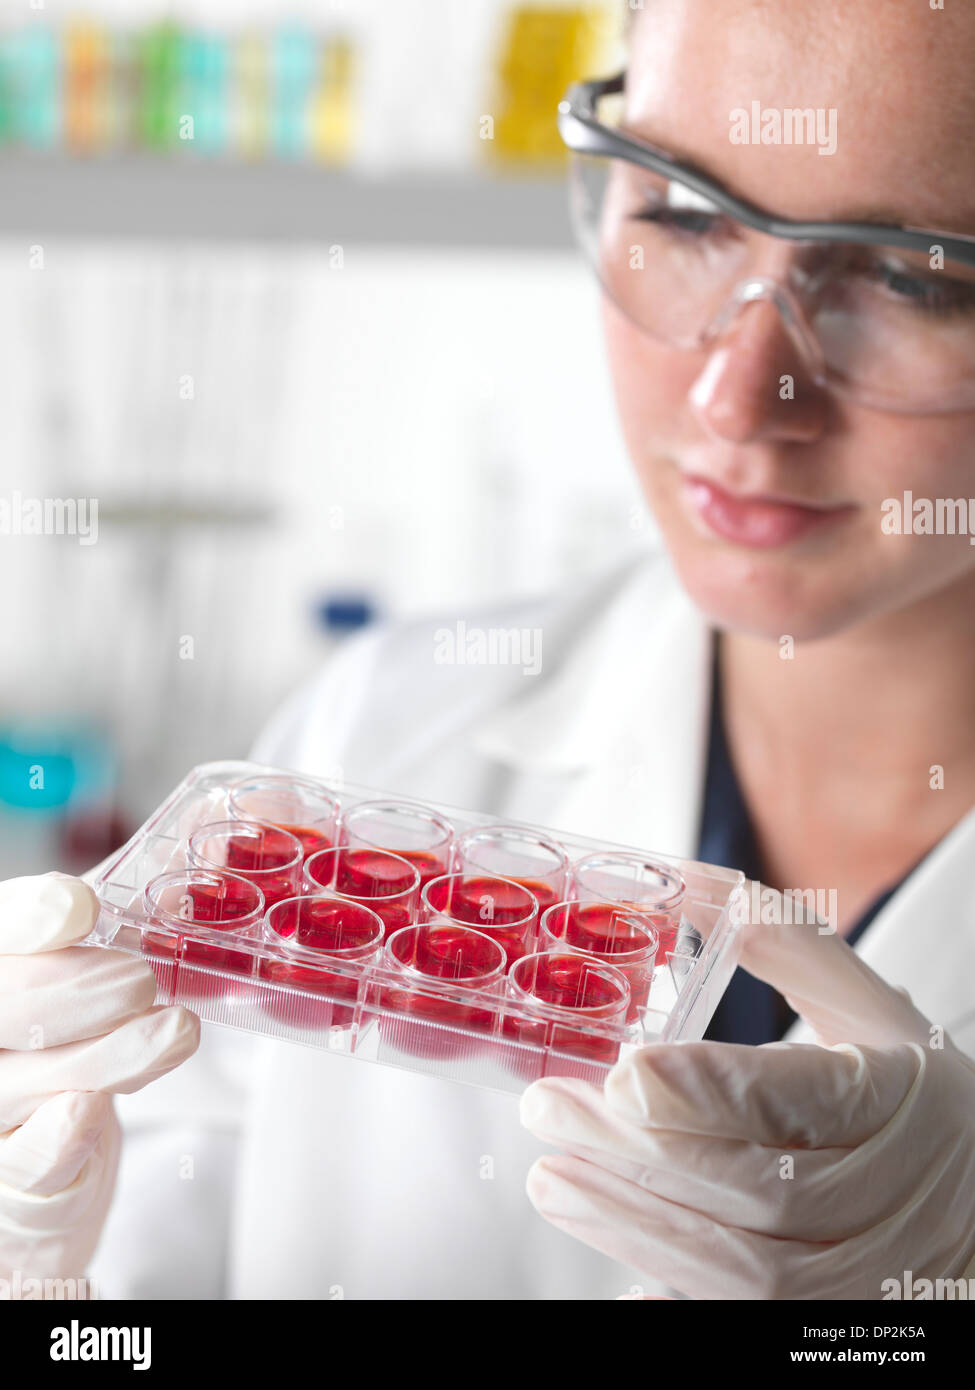 Stem cell research Stock Photo